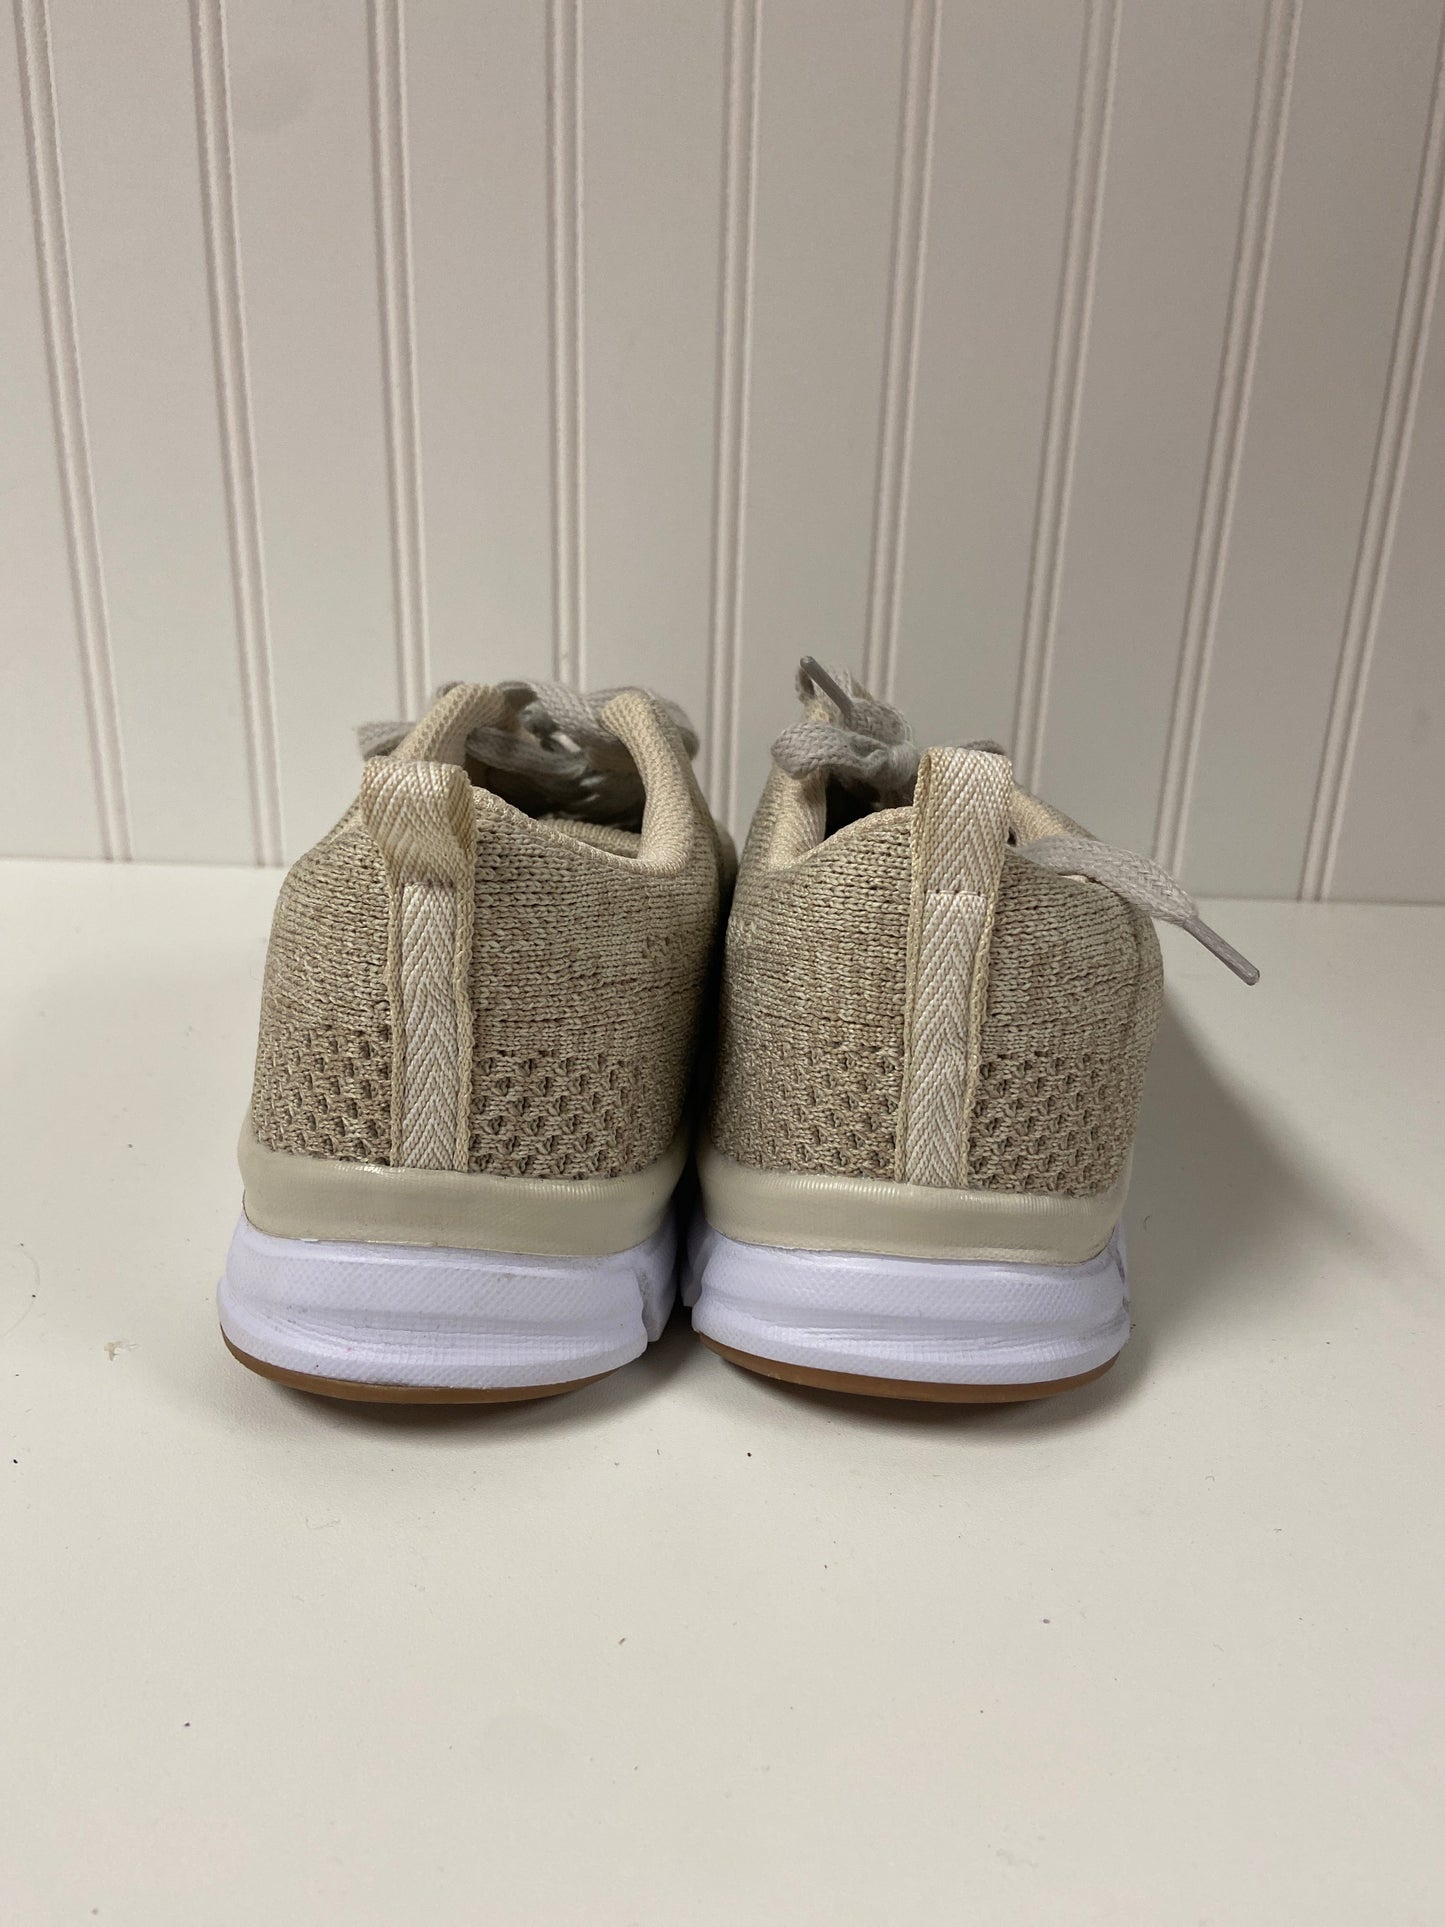 Beige Shoes Athletic Rbx, Size 8.5